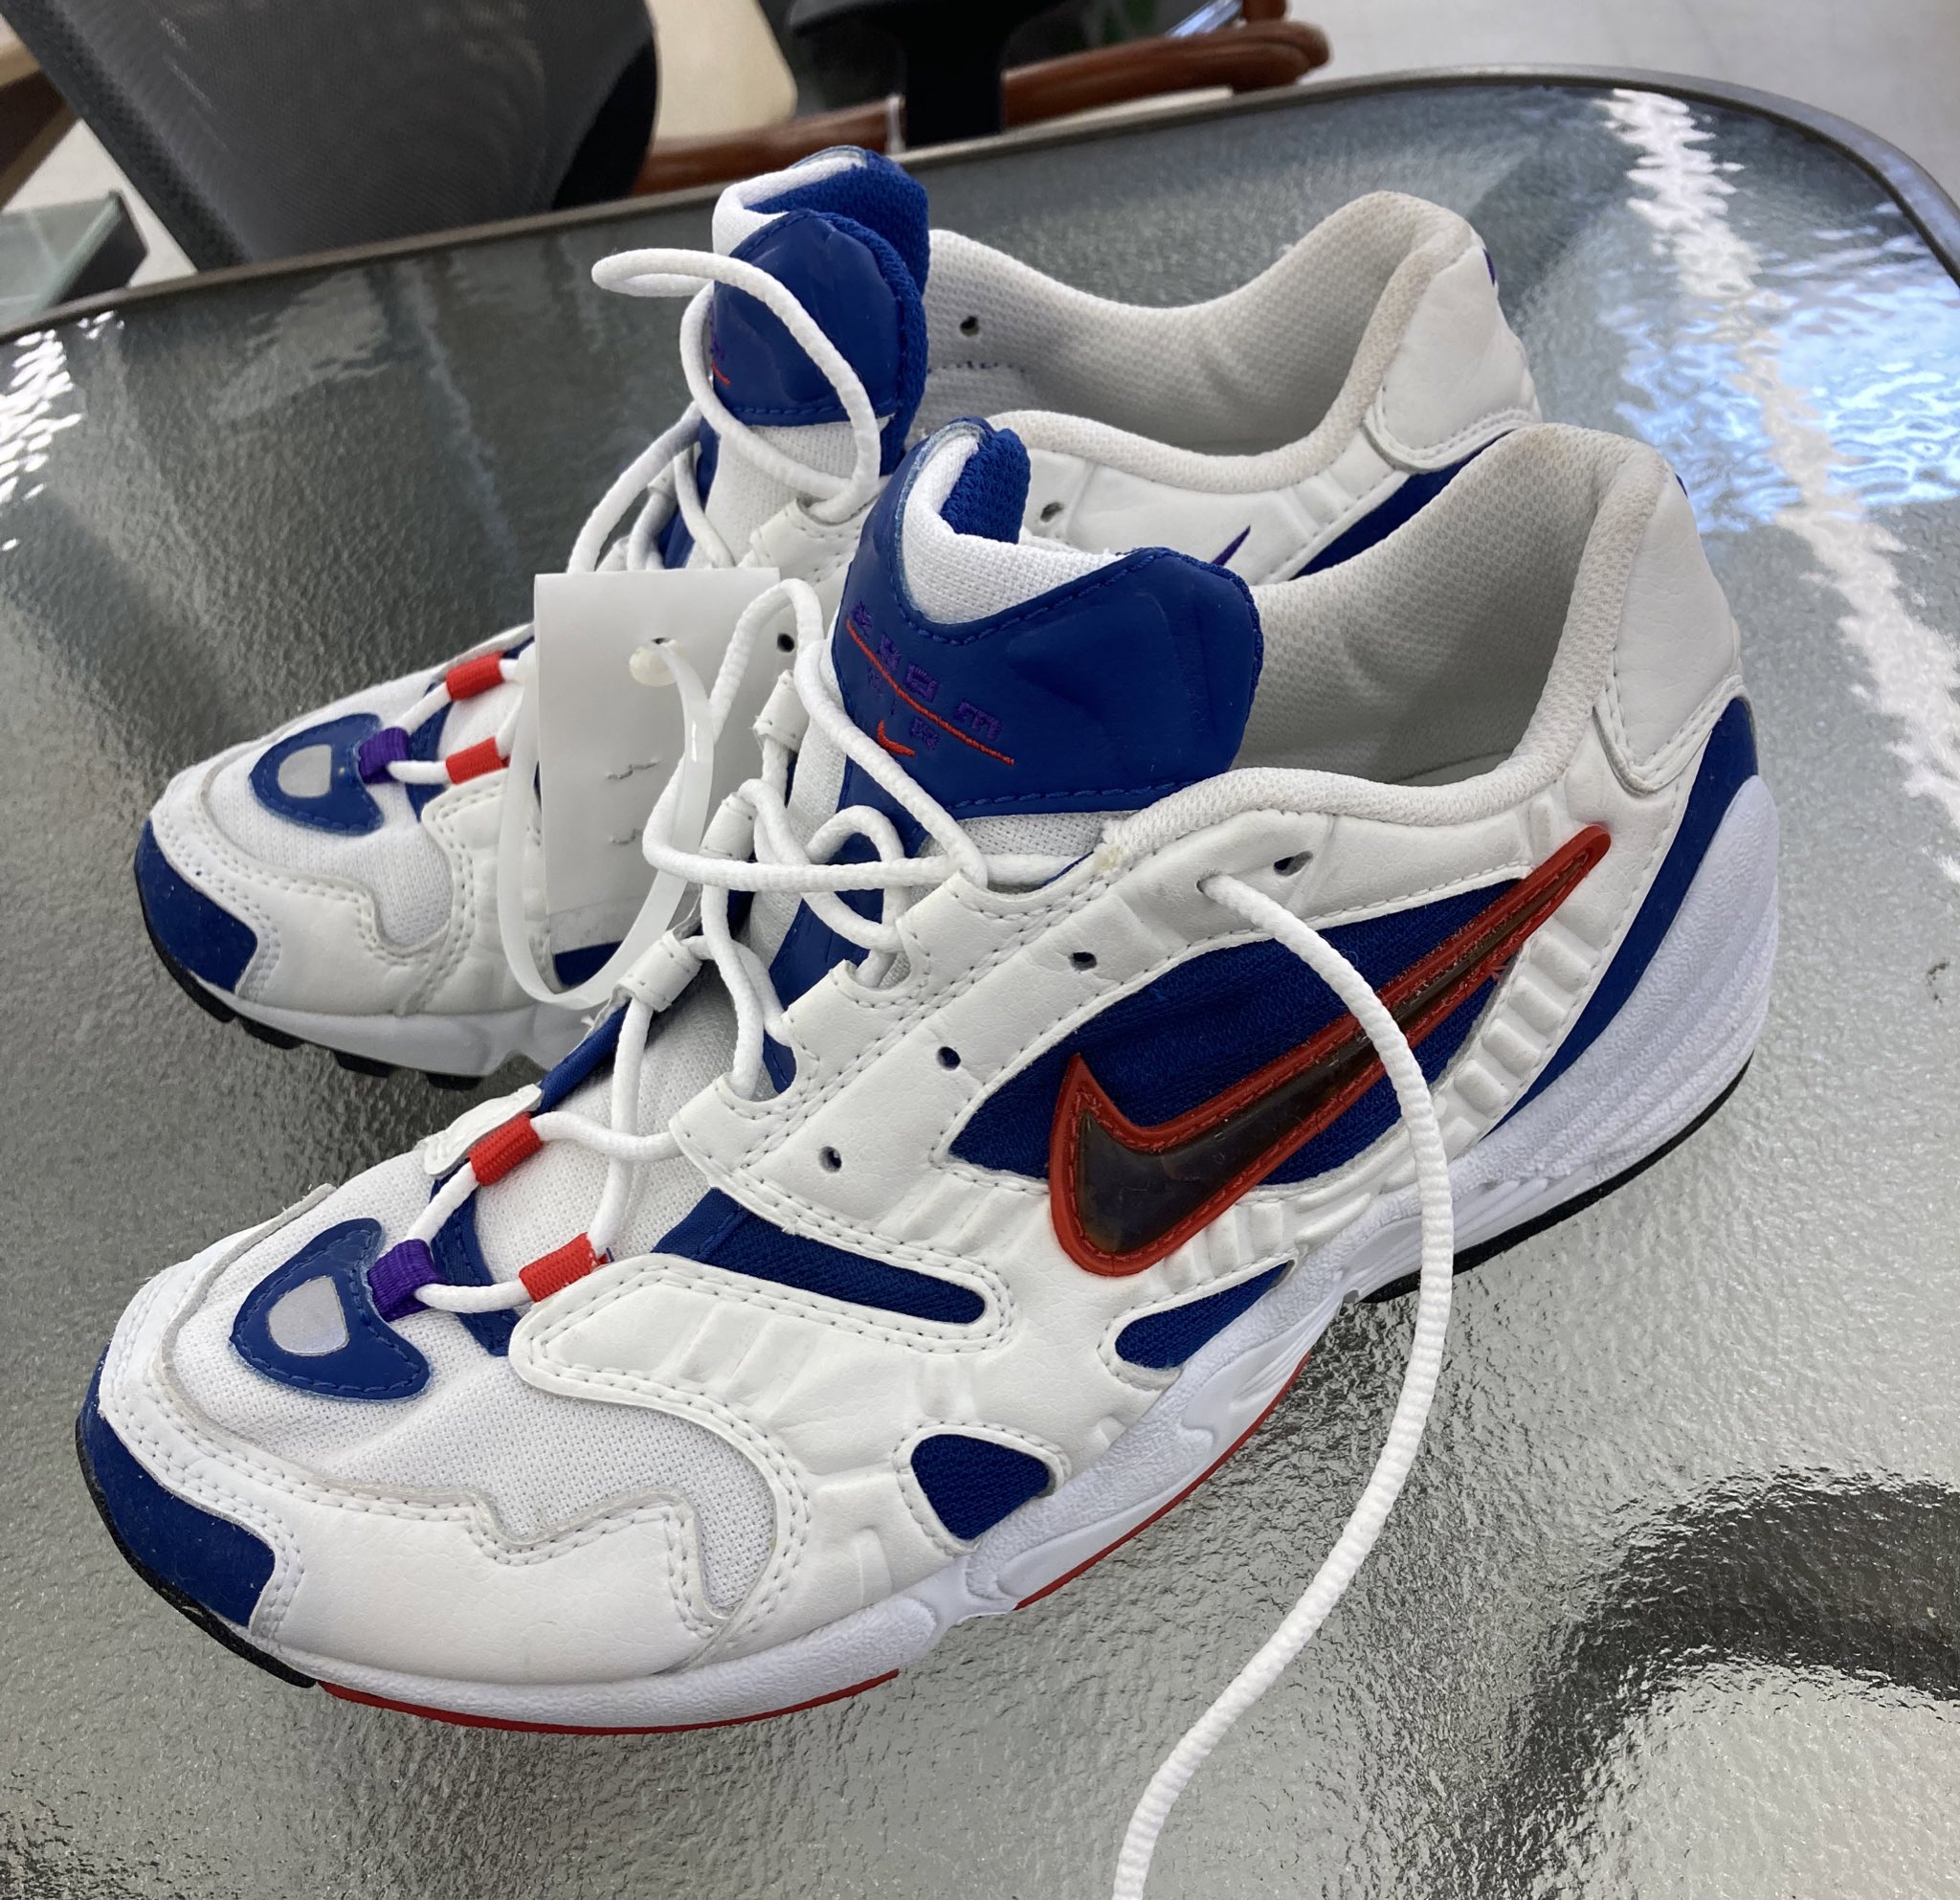 Knipoog Evalueerbaar martelen David Whitehead on Twitter: "Found an absolute running grail in the thrift  just now. Nike Air Equilibrium (Womens) from 1998. In deadstock condition.  Crazy find. https://t.co/IzNWXAoaFZ" / X